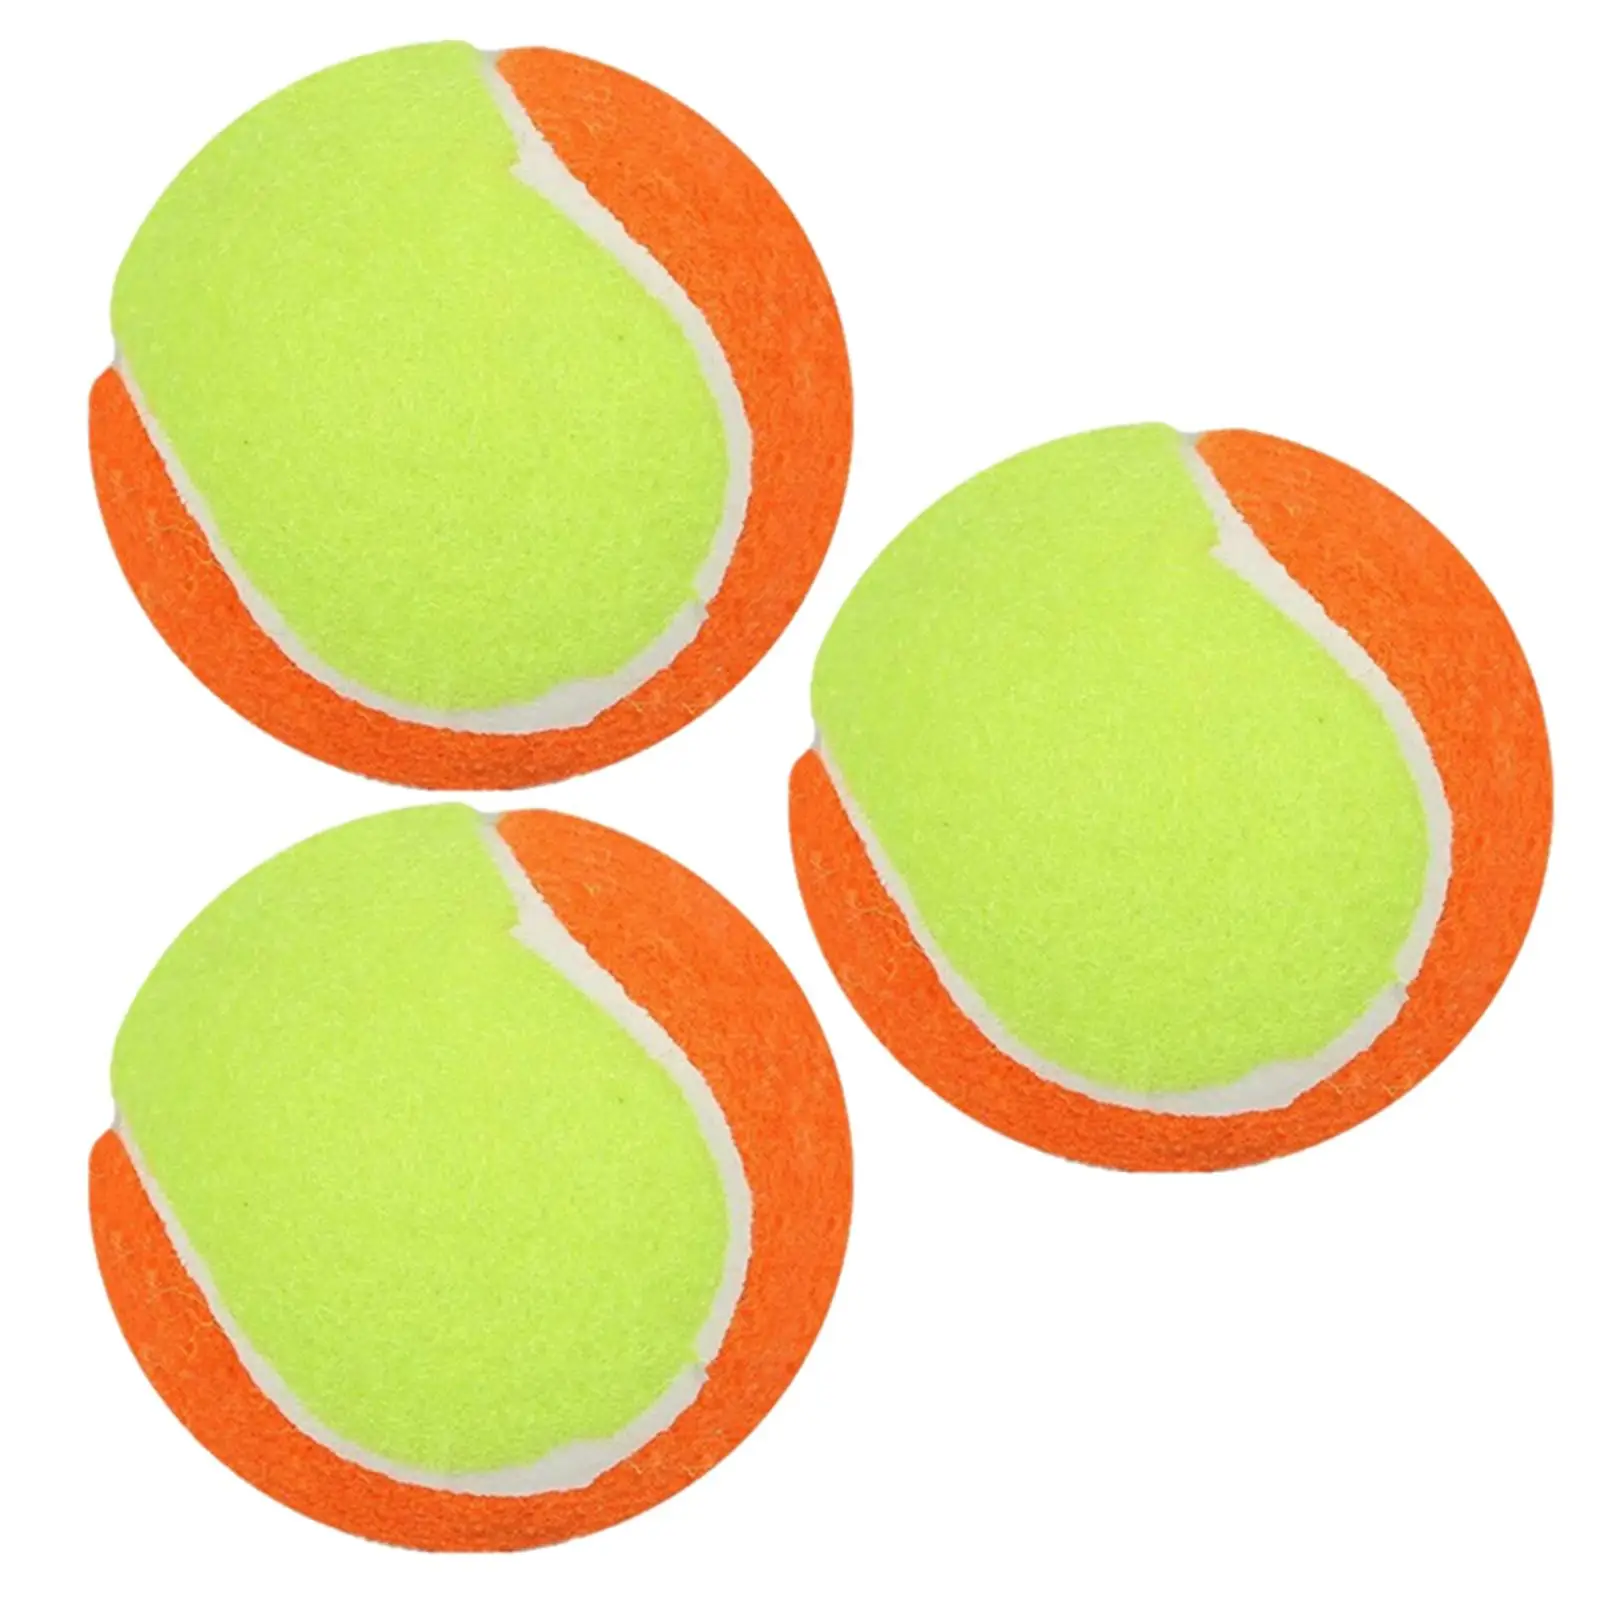 3 Pieces Tennis Balls Easily Track pinwheel Dog  Toy Dogs Chew Rubber Practice Tennis  for Tour Beach Indoor Dogs Beginners